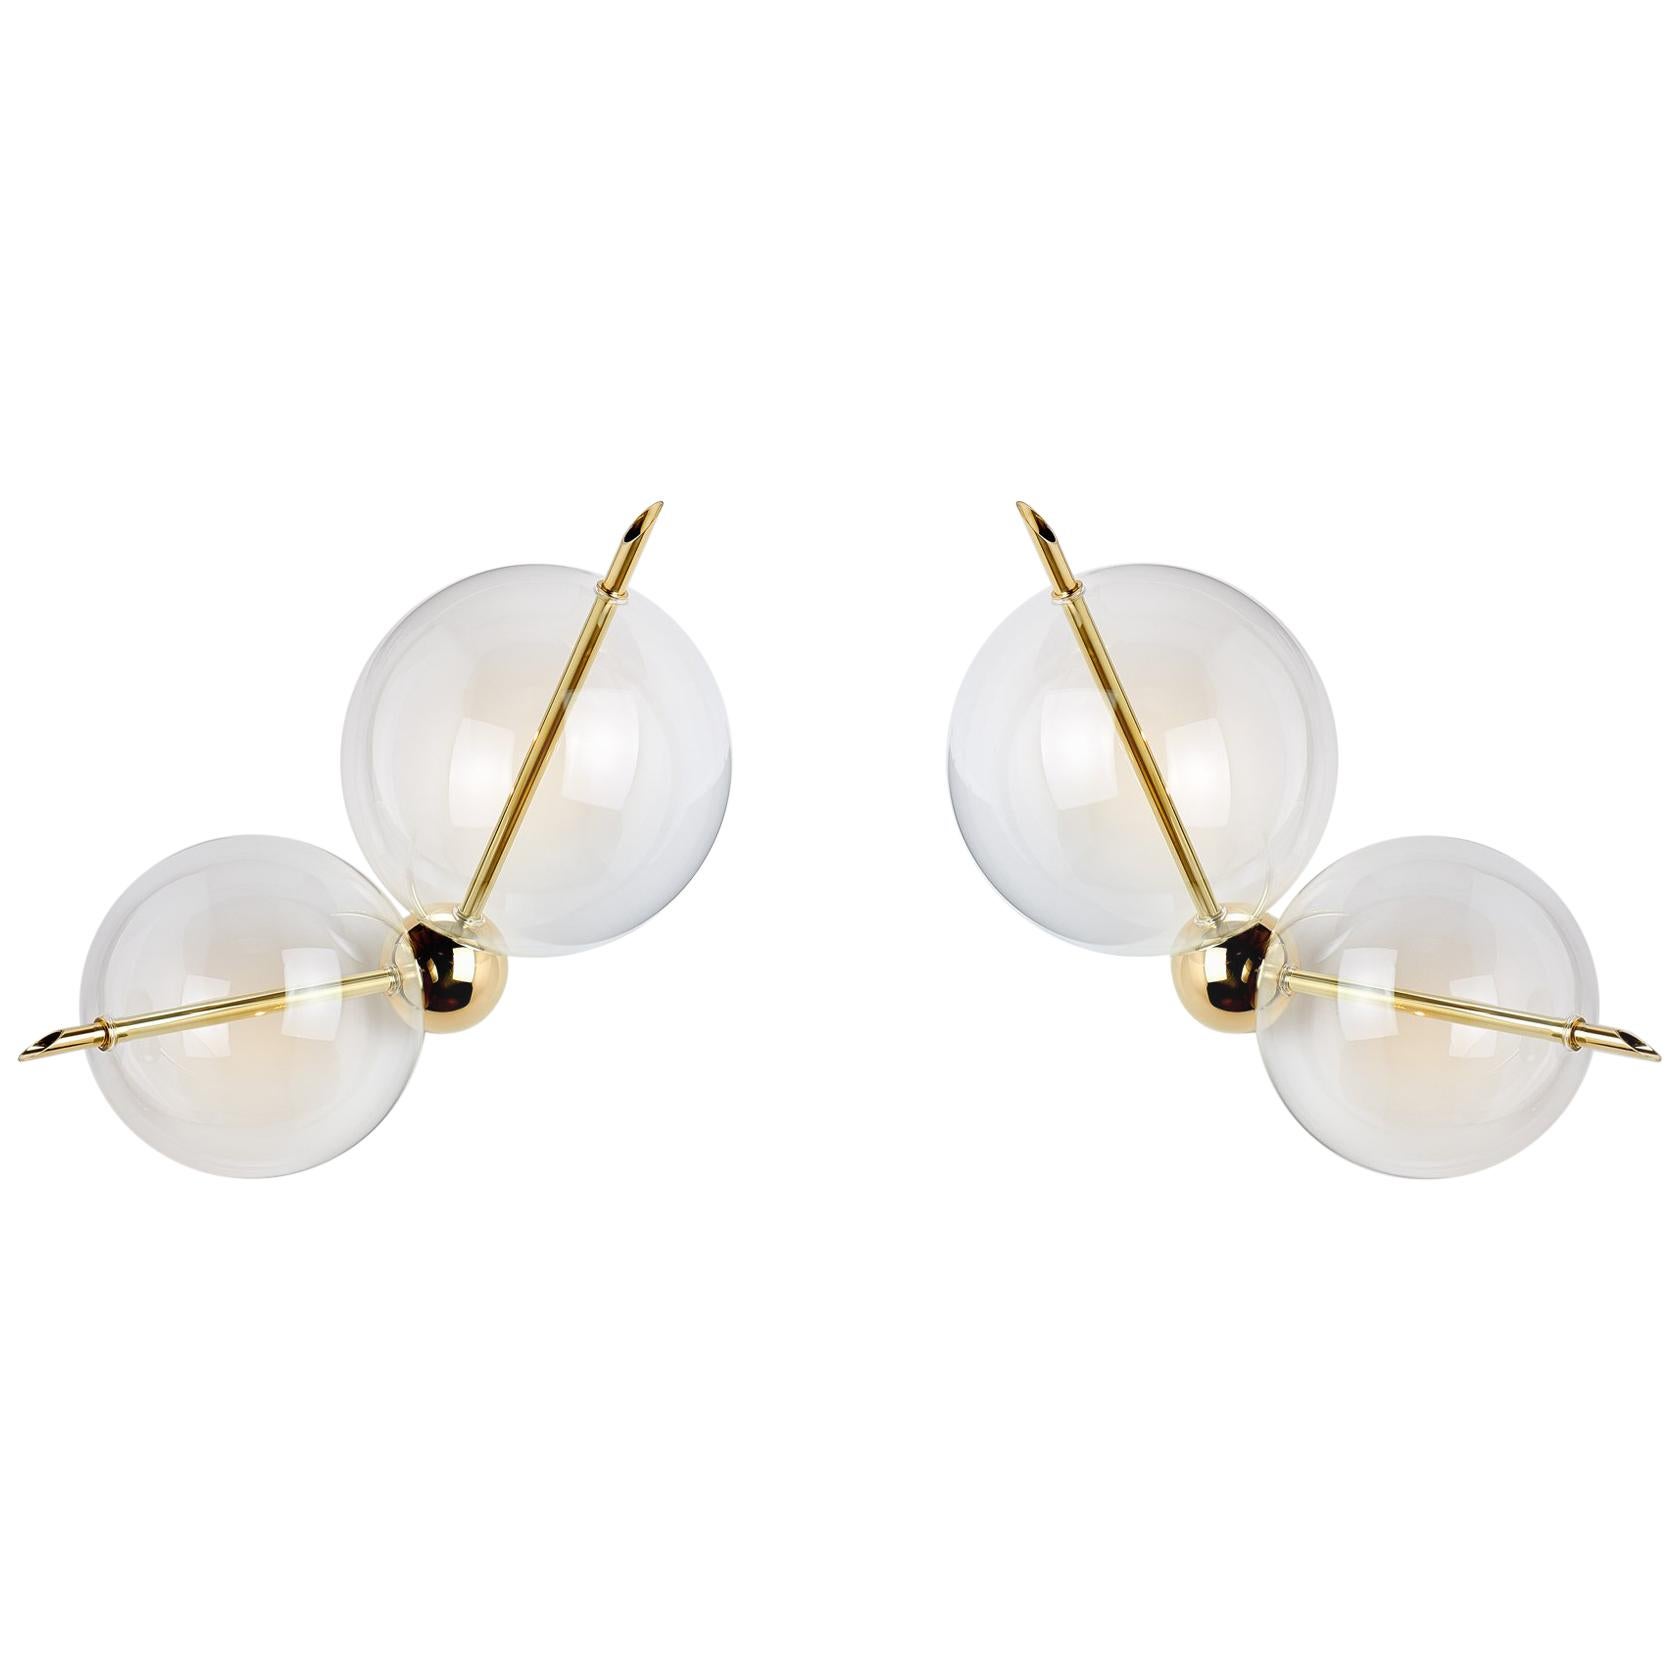 Lune Duo Contemporary Couple of Sconces / Wall Lights Polished Brass Blown Glass For Sale